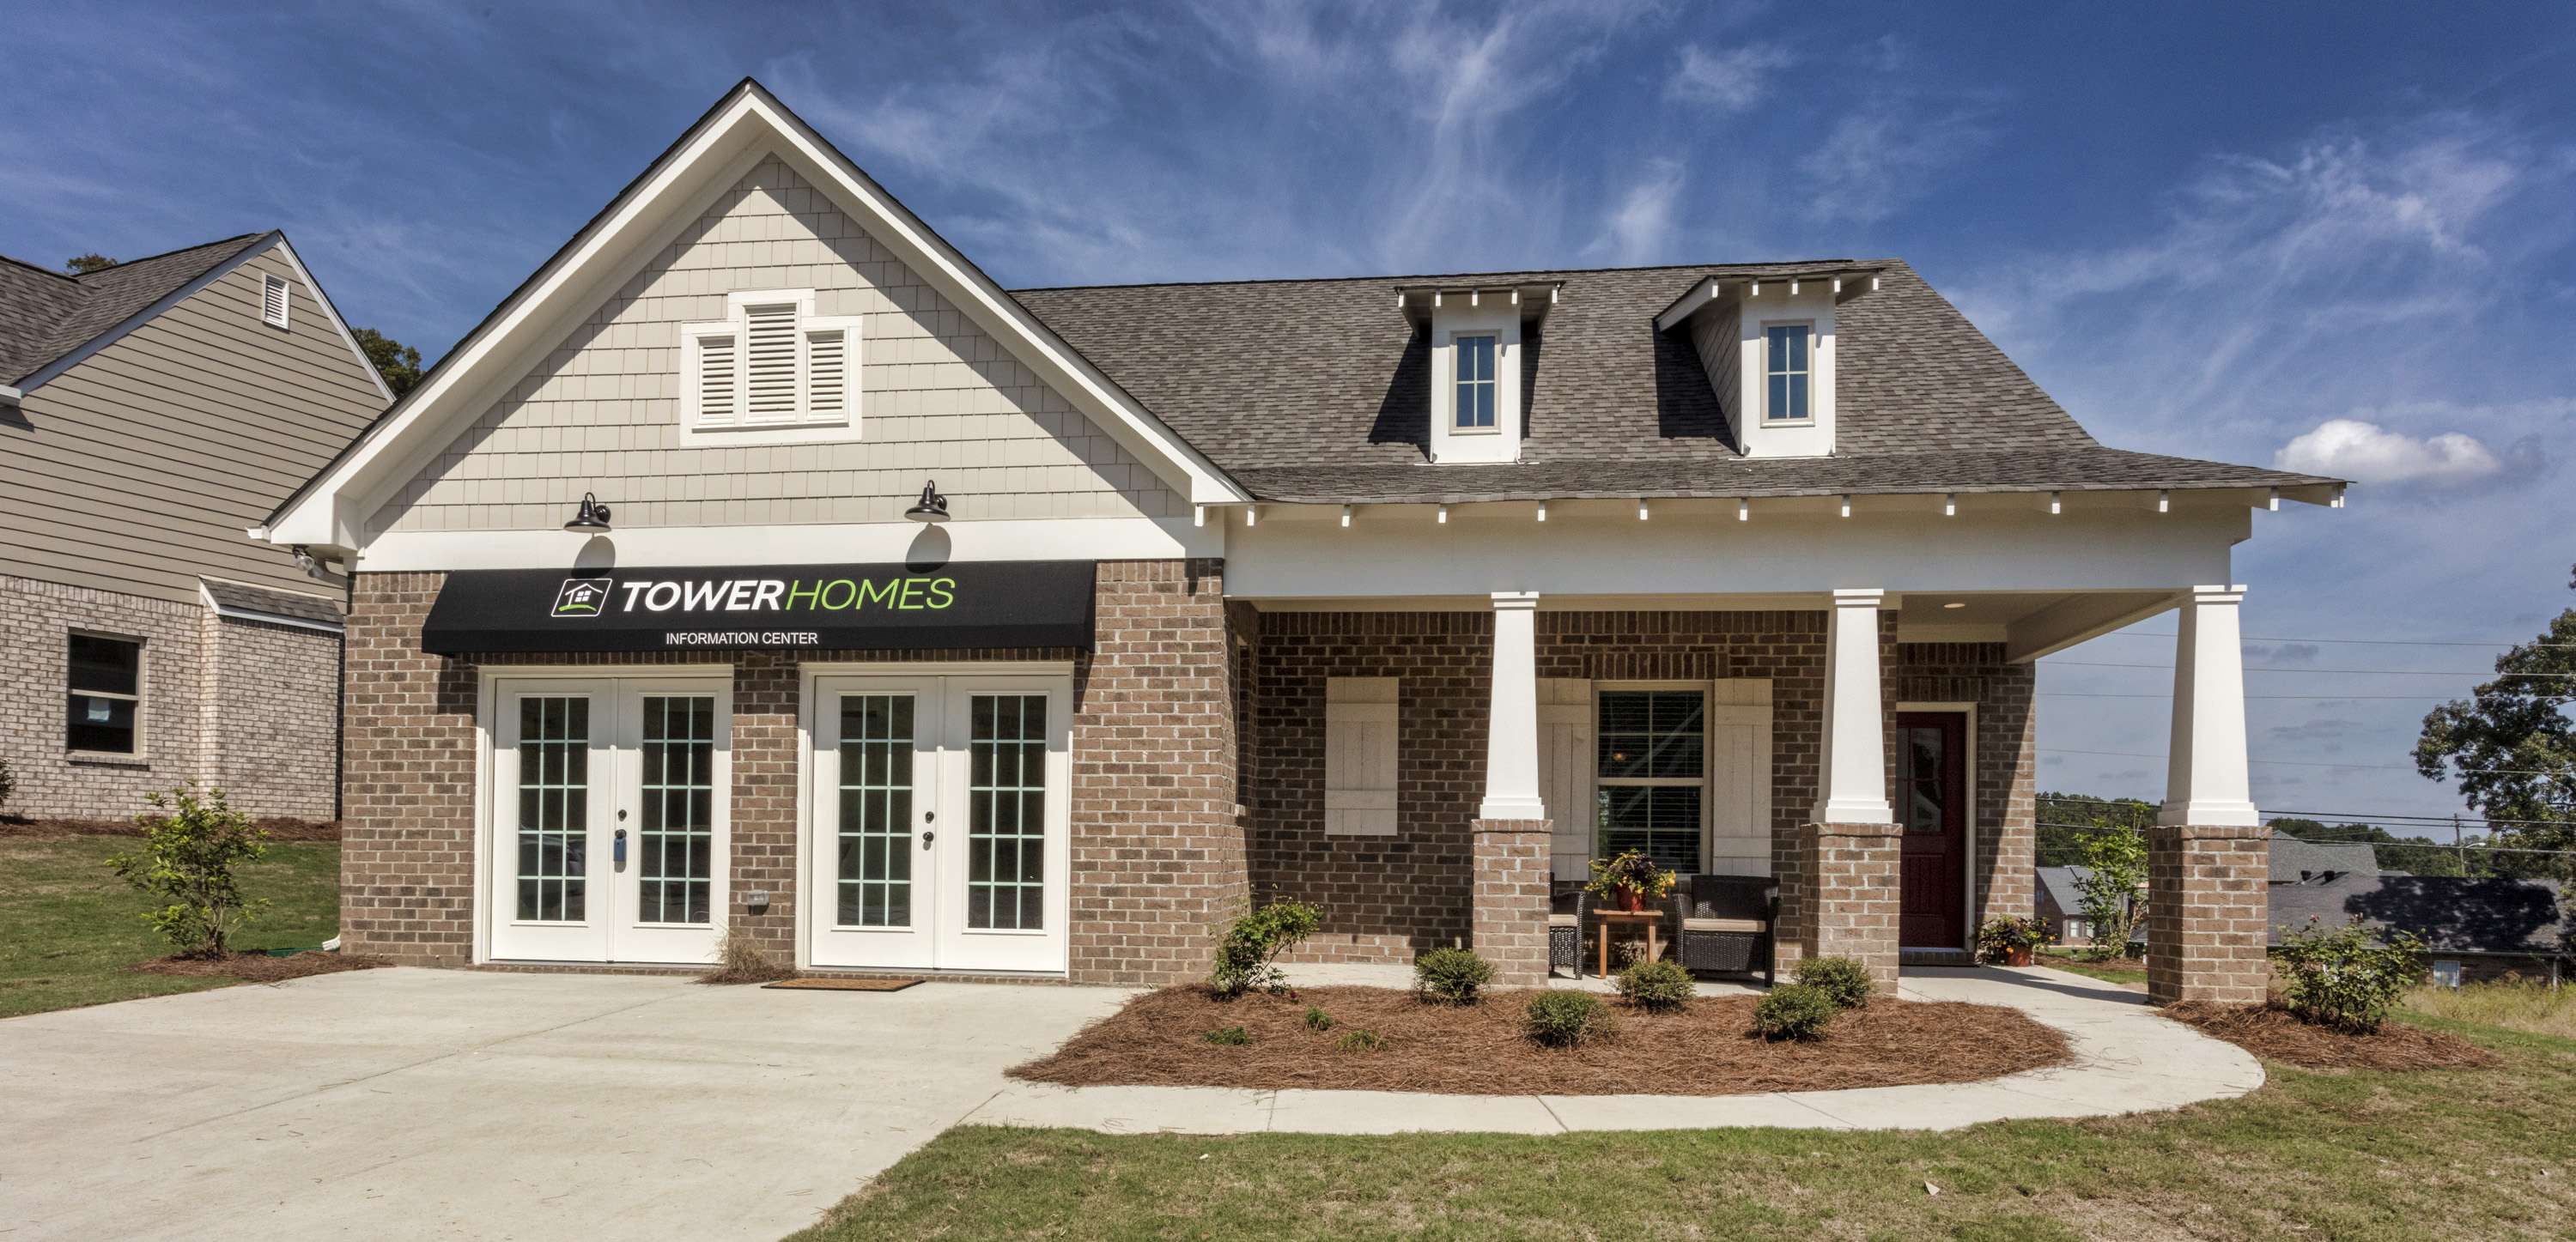 See the new model home in Woodridge today